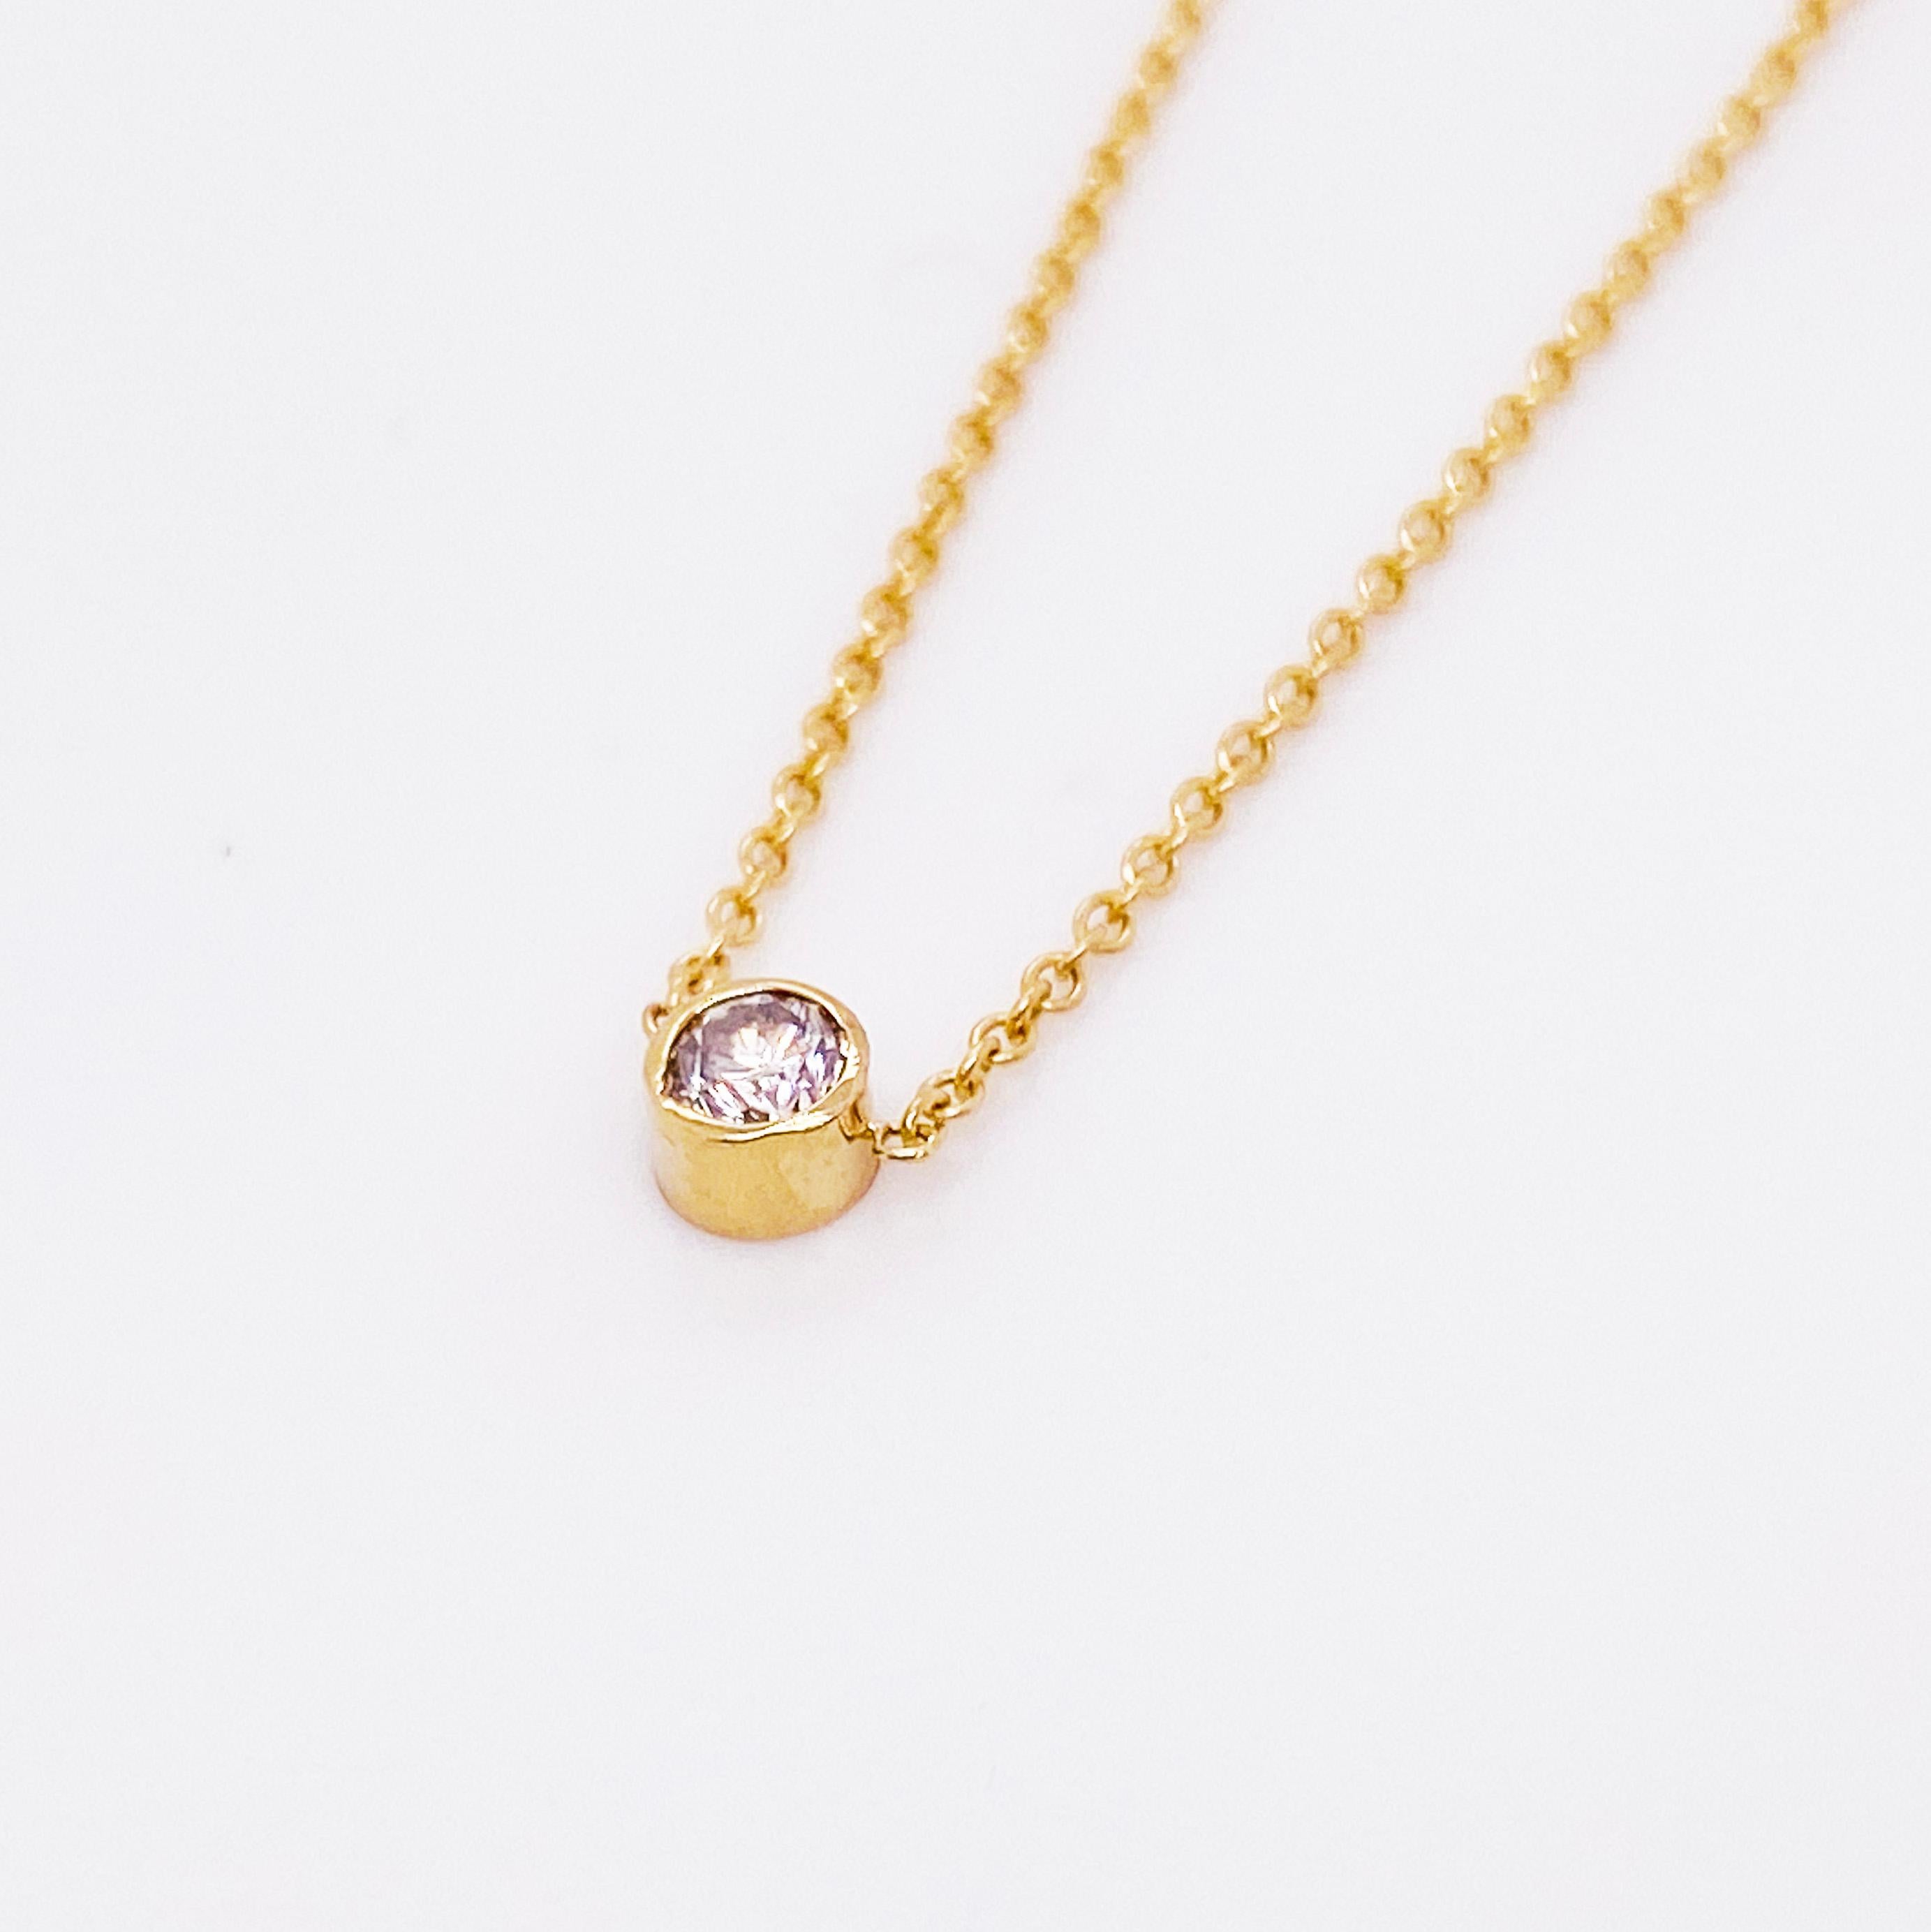 Modern Diamond Bezel Necklace with 0.12 Carat Diamond 14 Karat Yellow Gold Cable Chain For Sale